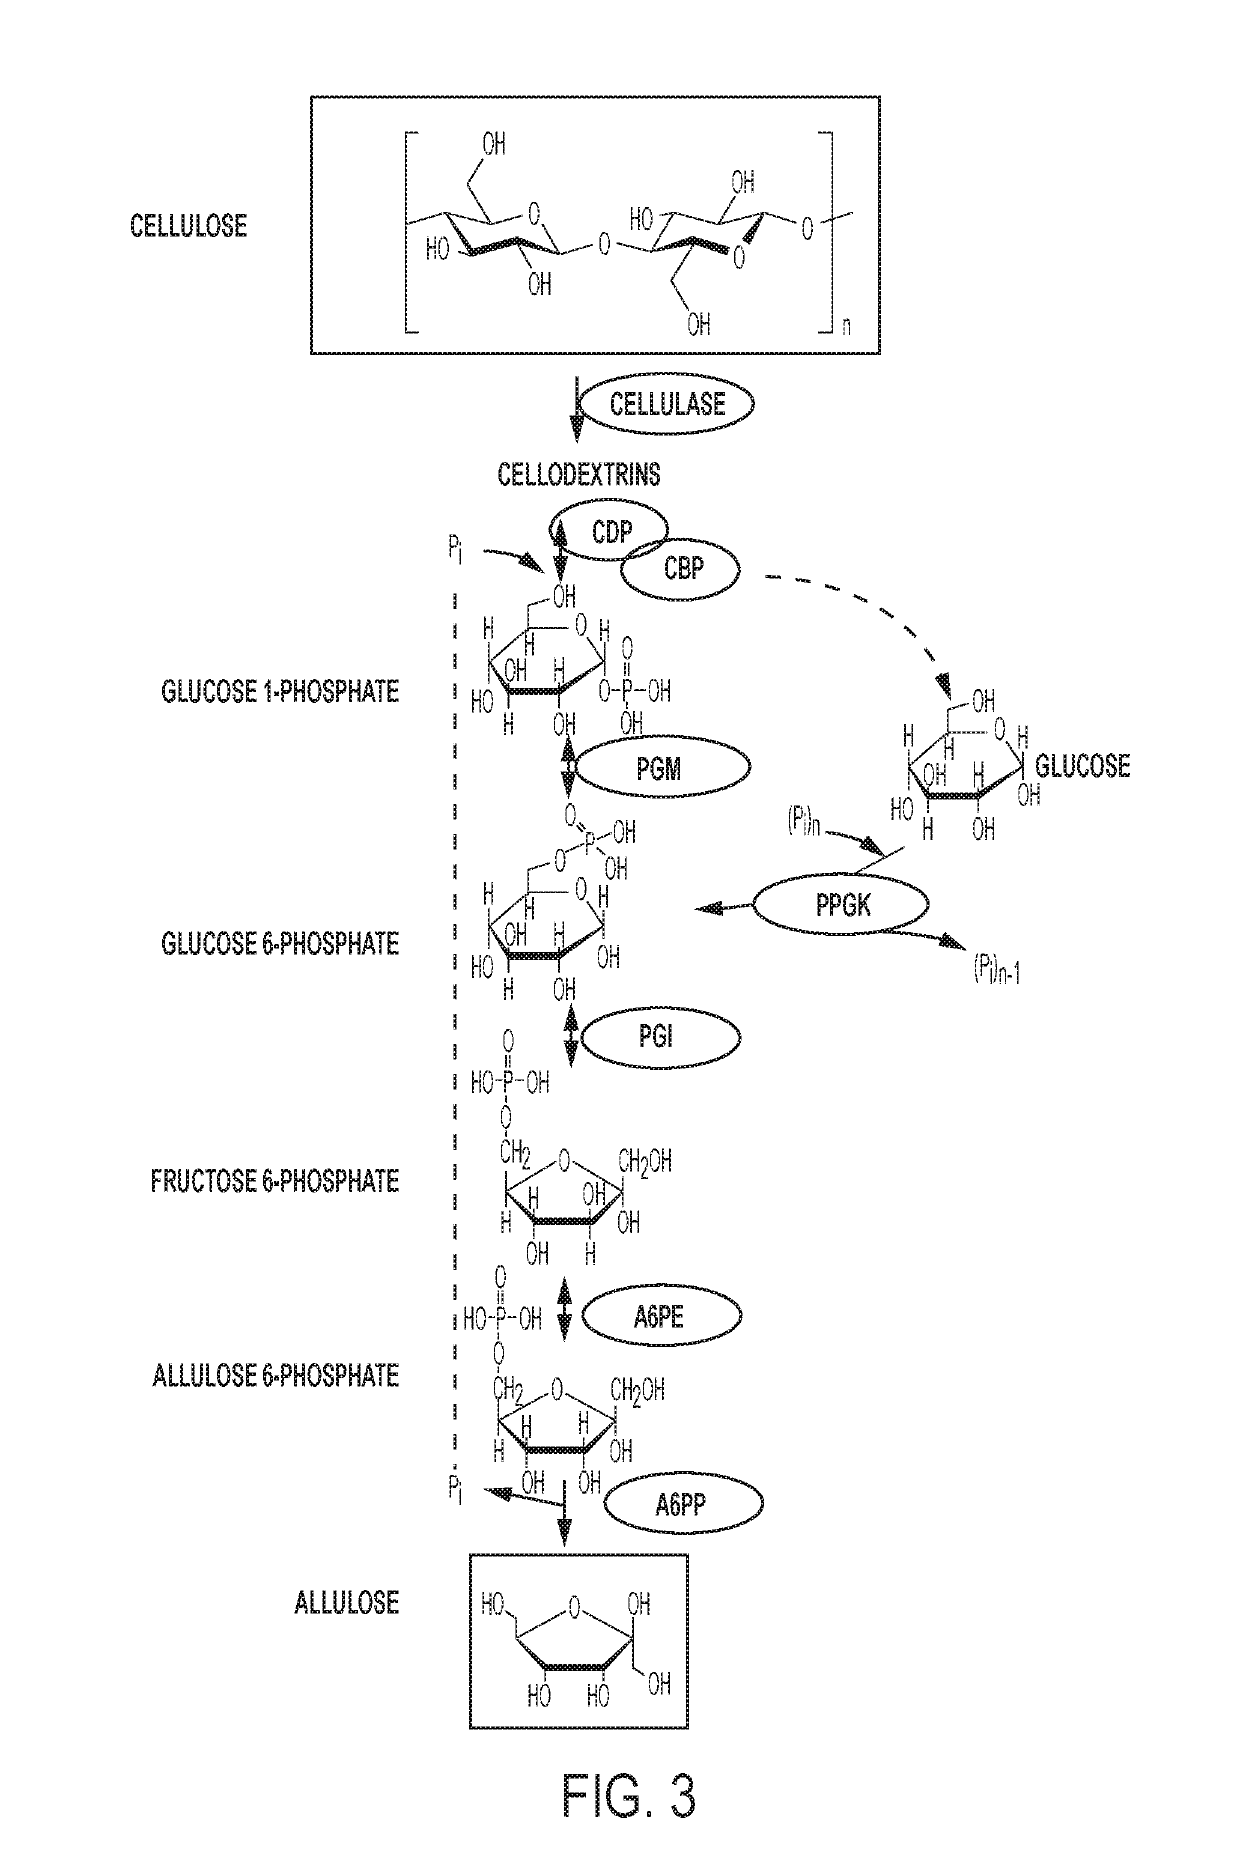 Enzymatic production of d-allulose